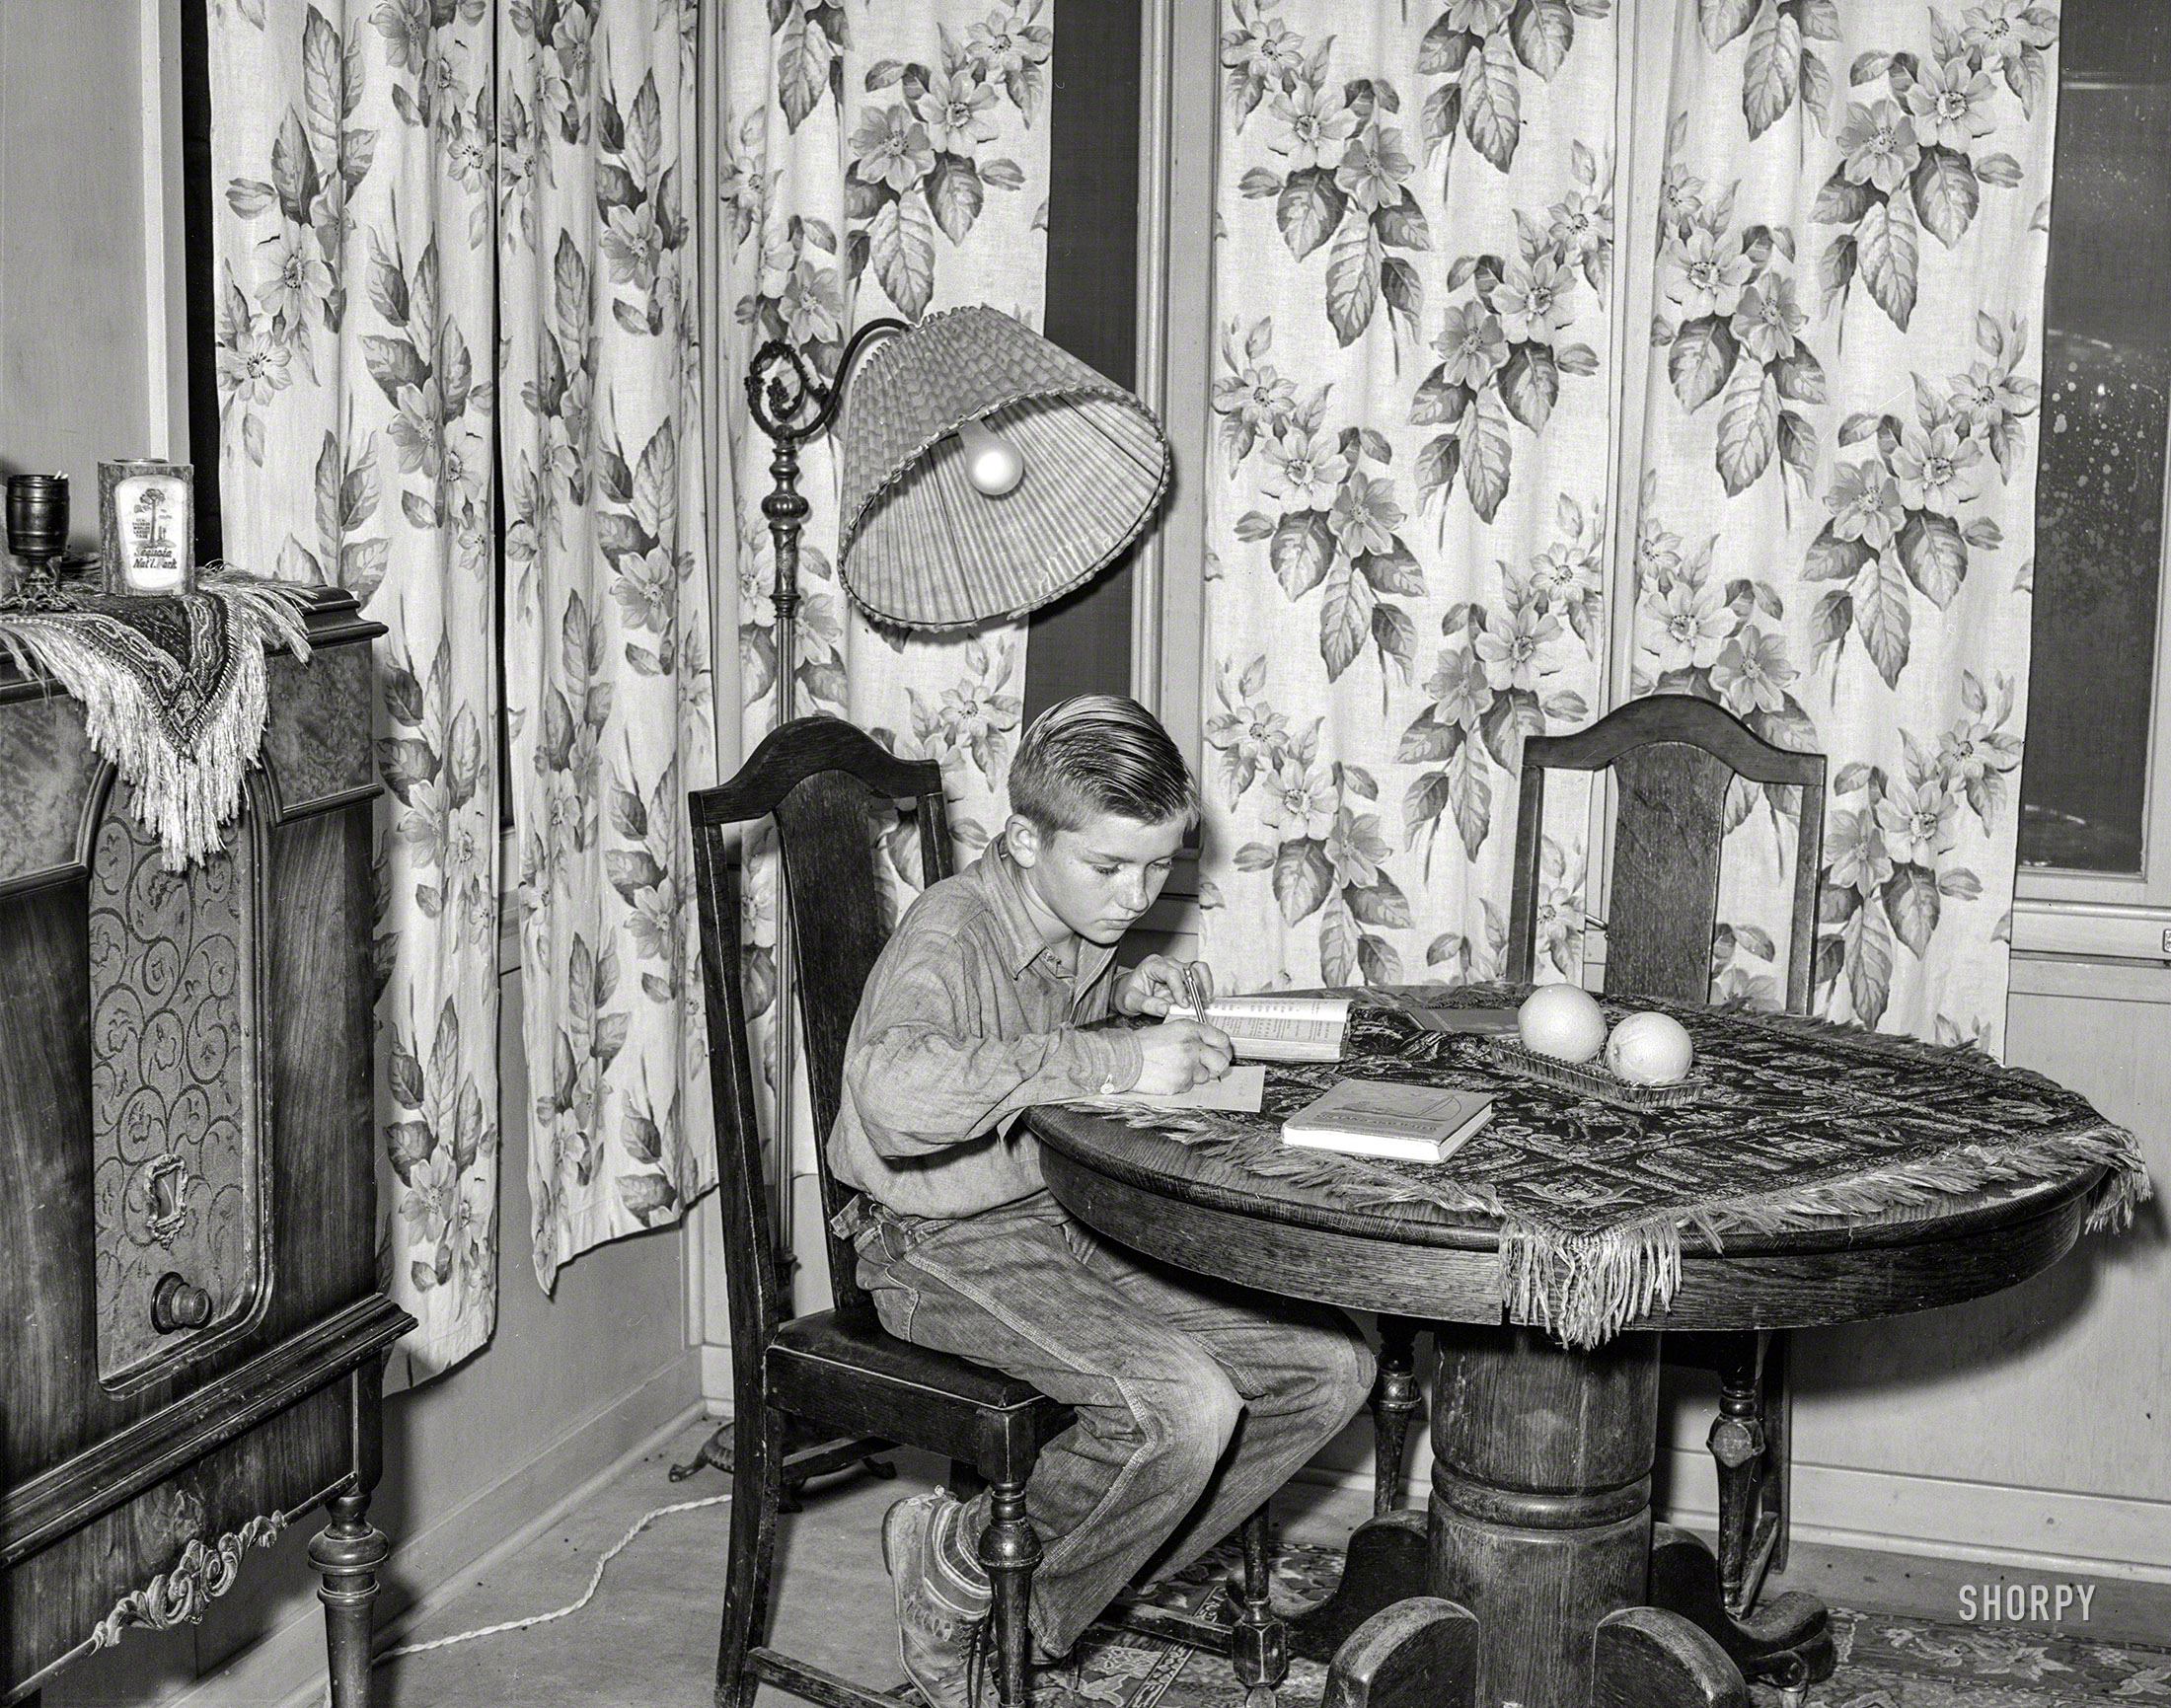 November 1940. "Son of Mr. Schmidt, member of Mineral King cooperative farm, doing his homework. Tulare County, California." Medium format negative by Russell Lee for the Farm Security Administration. View full size.